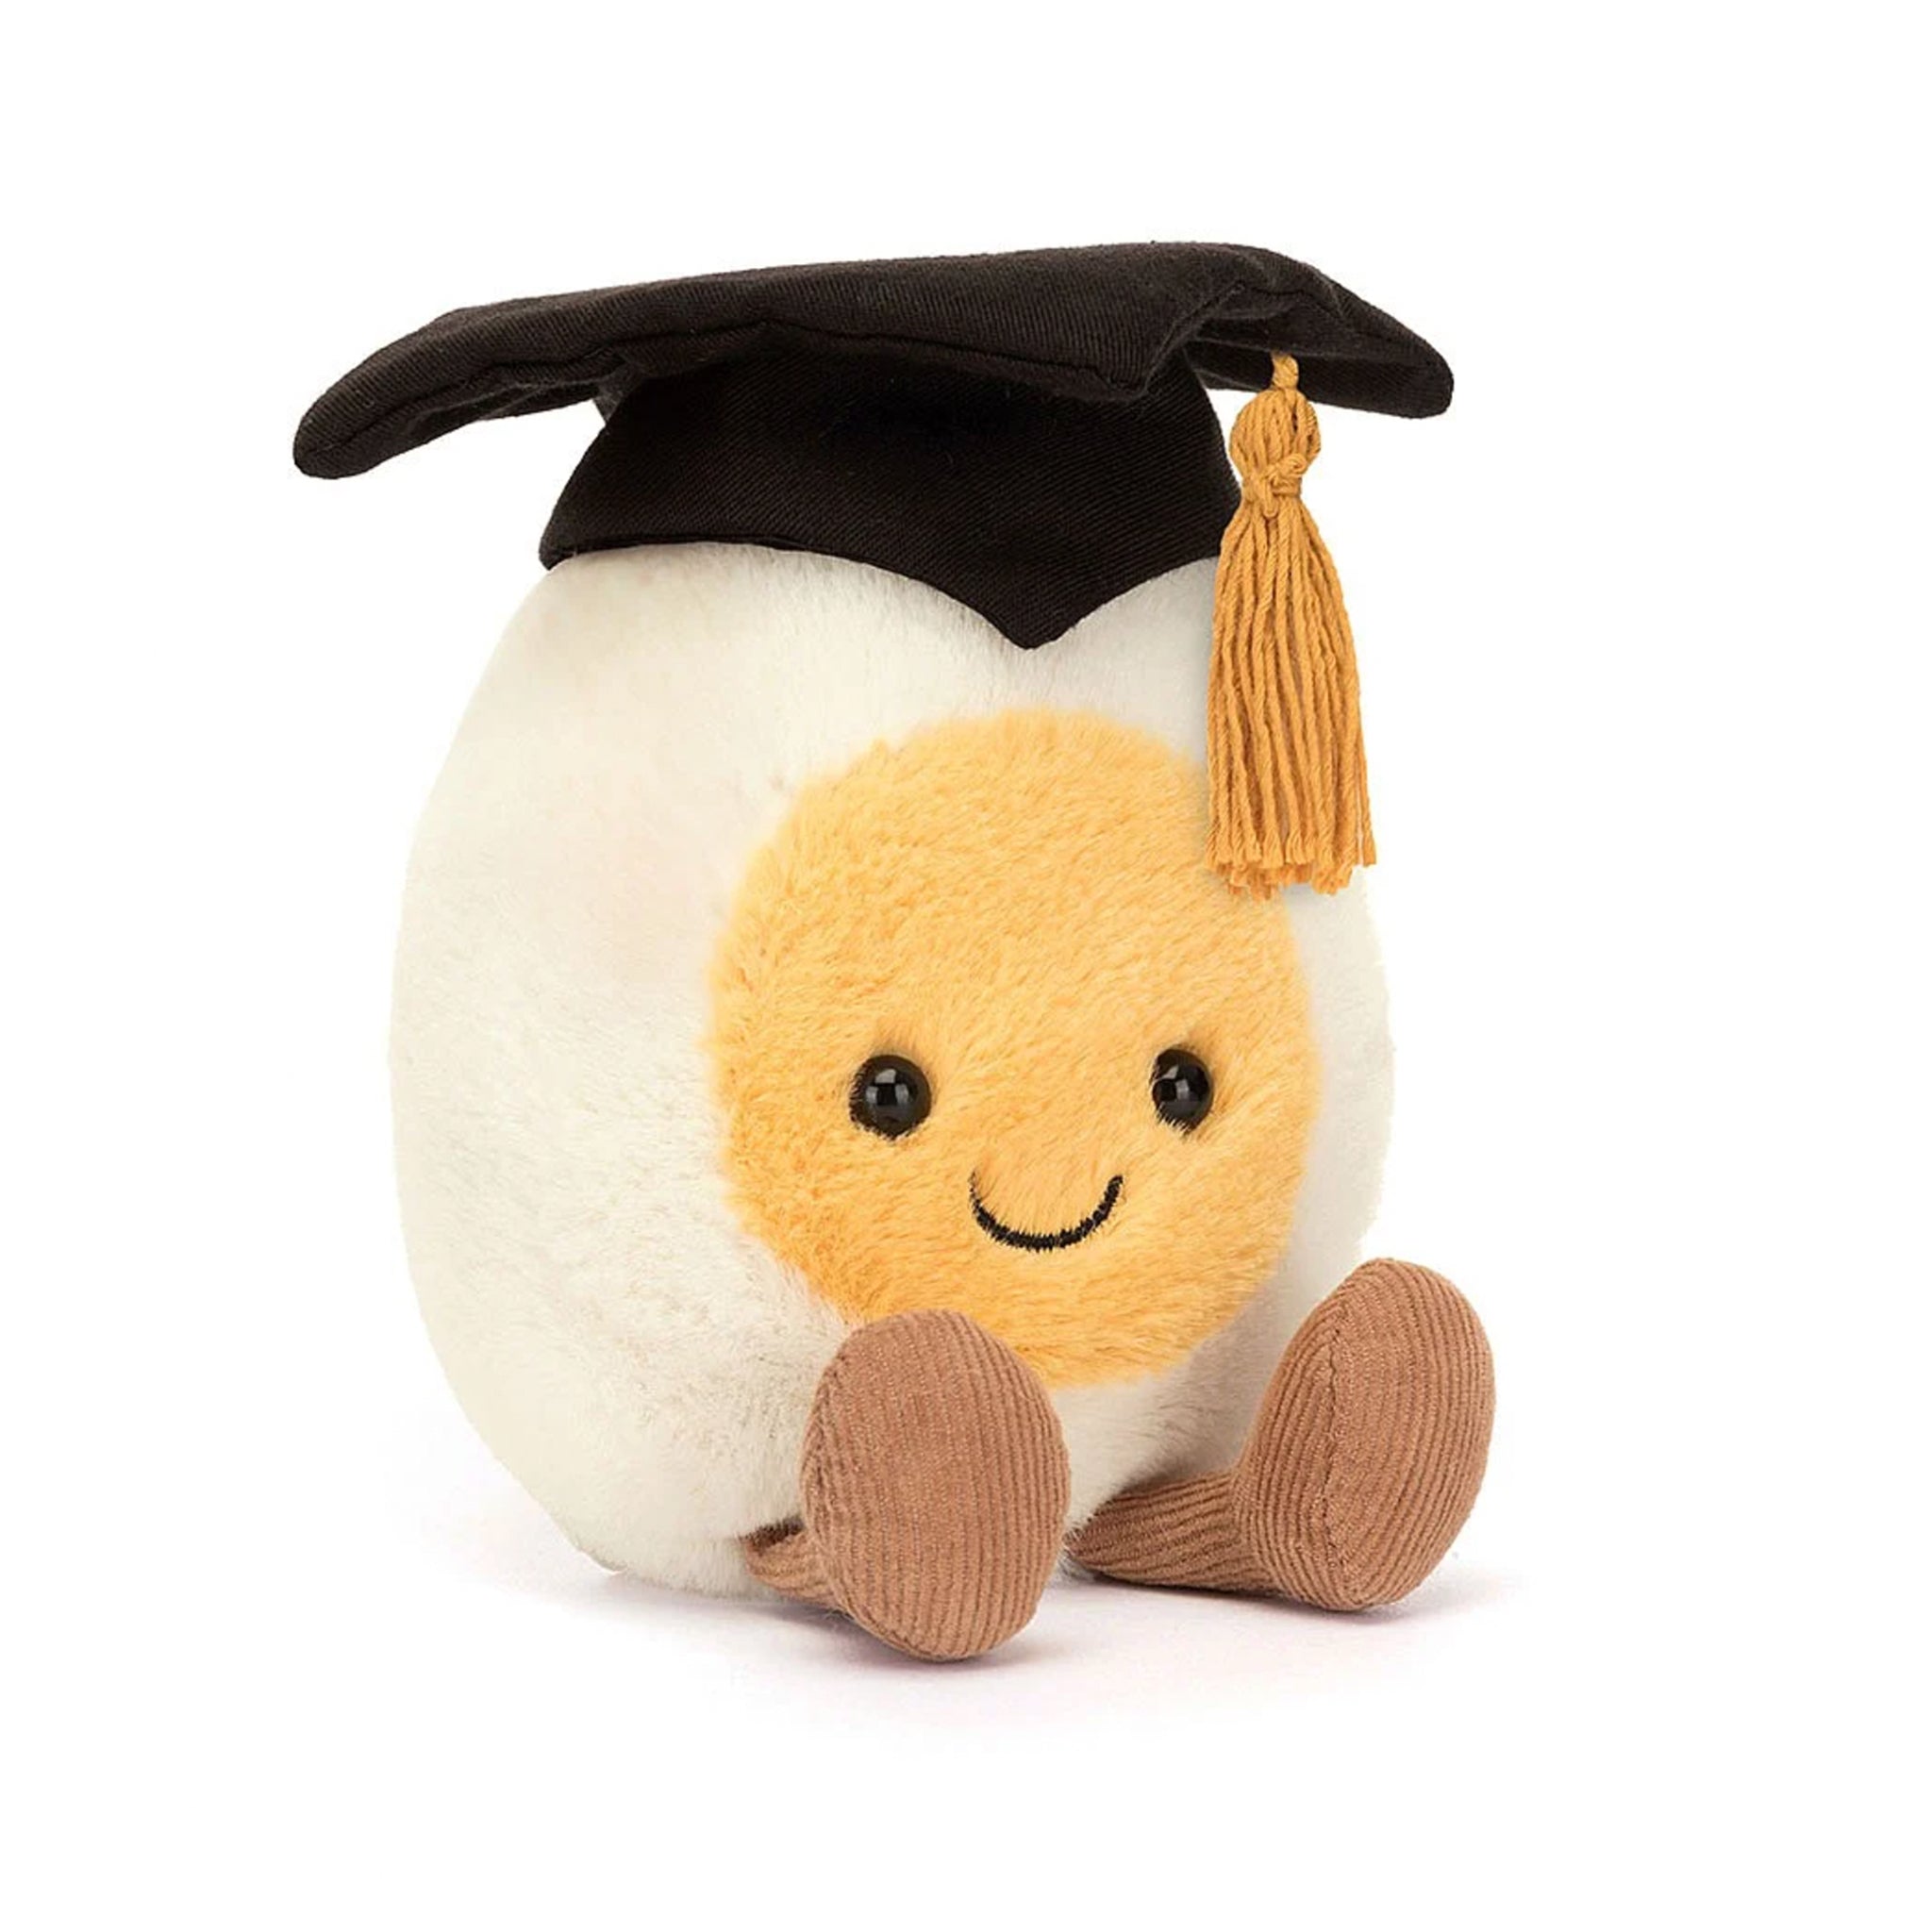 On a white background is a stuffed toy in the shape of a hard boiled egg wearing a graduation cap and smiling. 